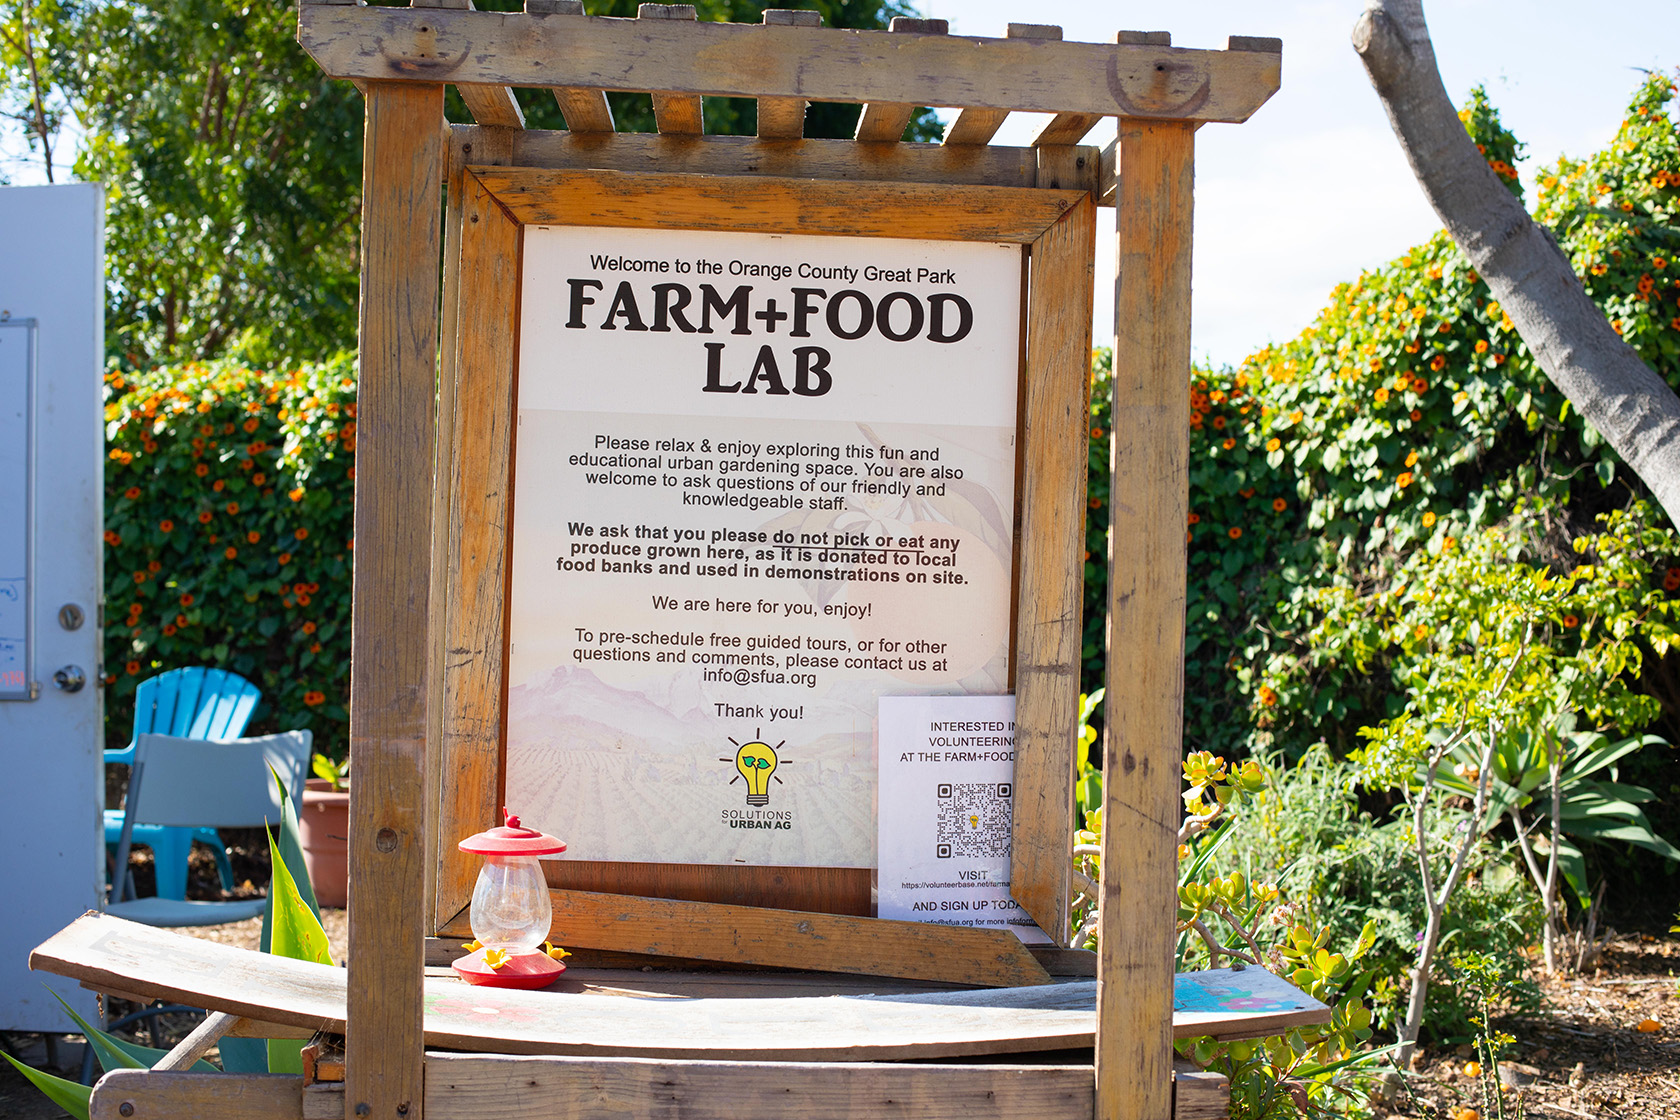 Farm + Food Lab in Irvine's Great Park (Photo by Julie Nguyen)